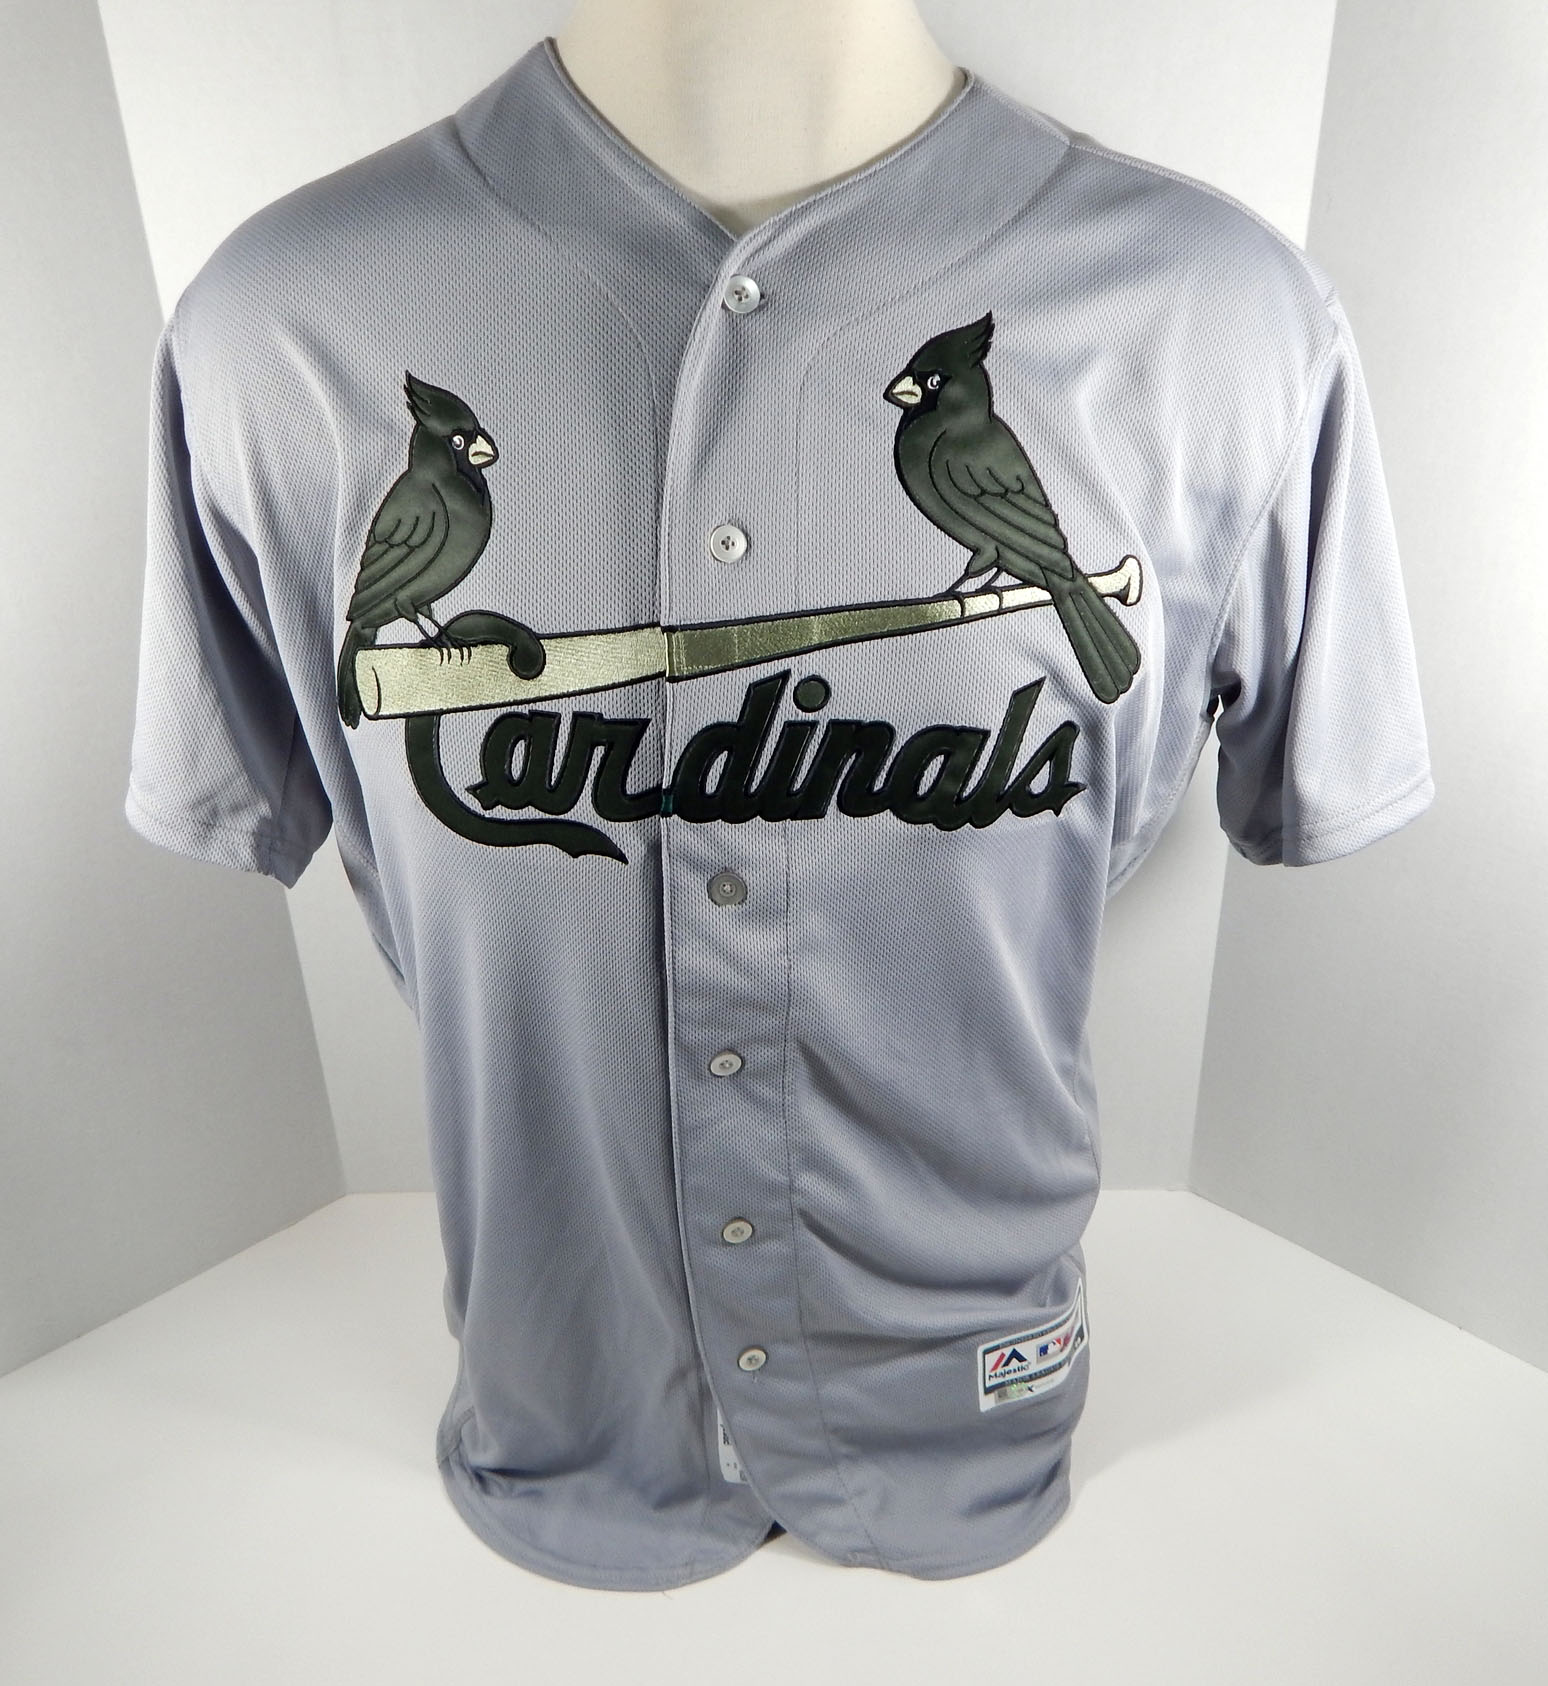 2018 St. Louis Cardinals Blank # Game Issued Grey Jersey Memorial Day 48 STLC417 | eBay